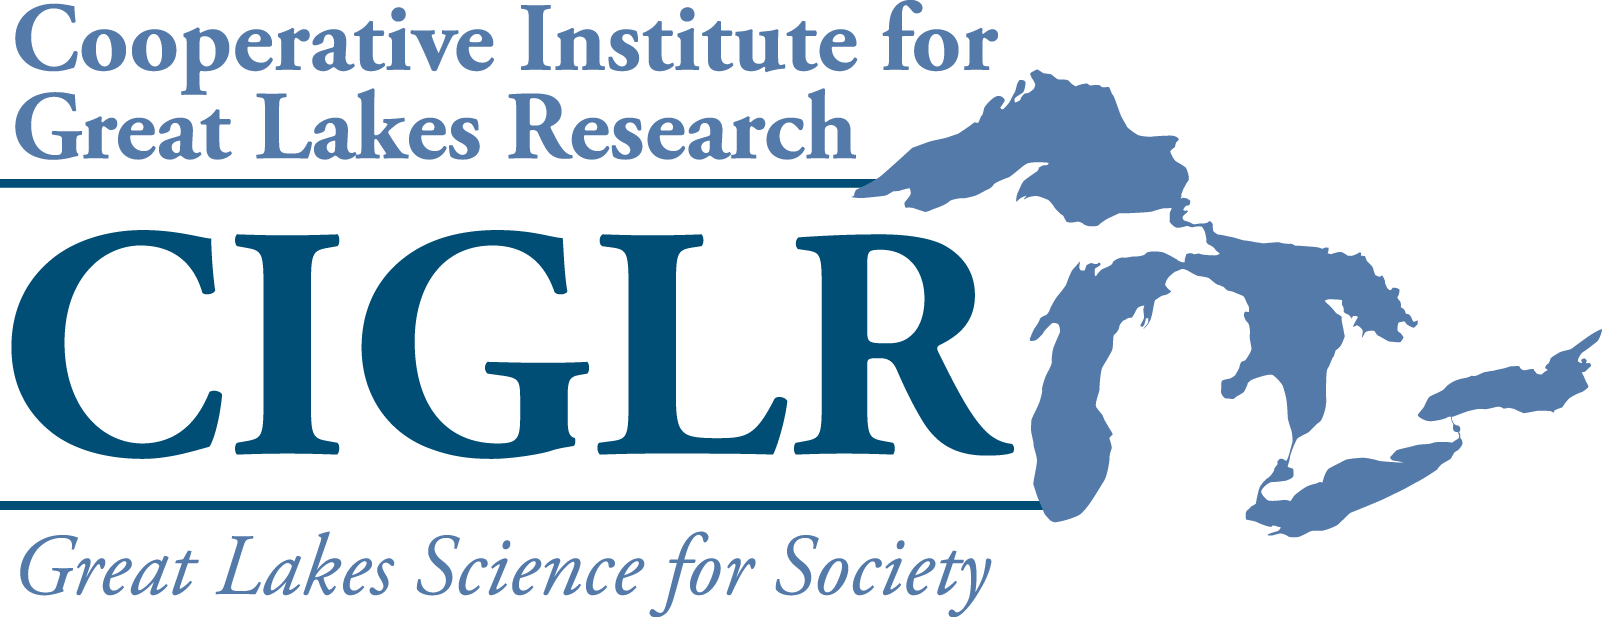 Visit the web page of the Cooperative Institute for Great Lakes Research